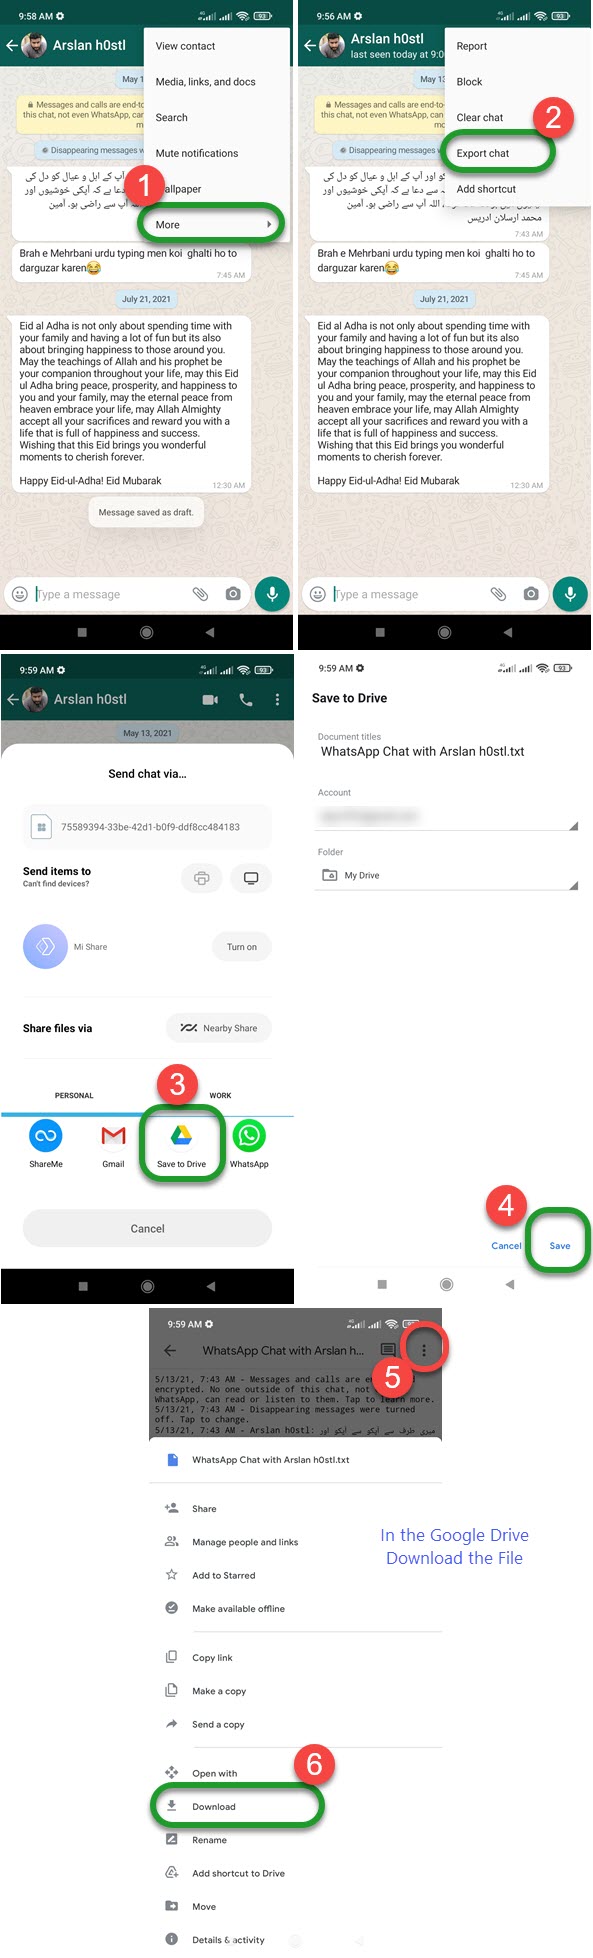 Whatsapp export chat web to on how Export WhatsApp